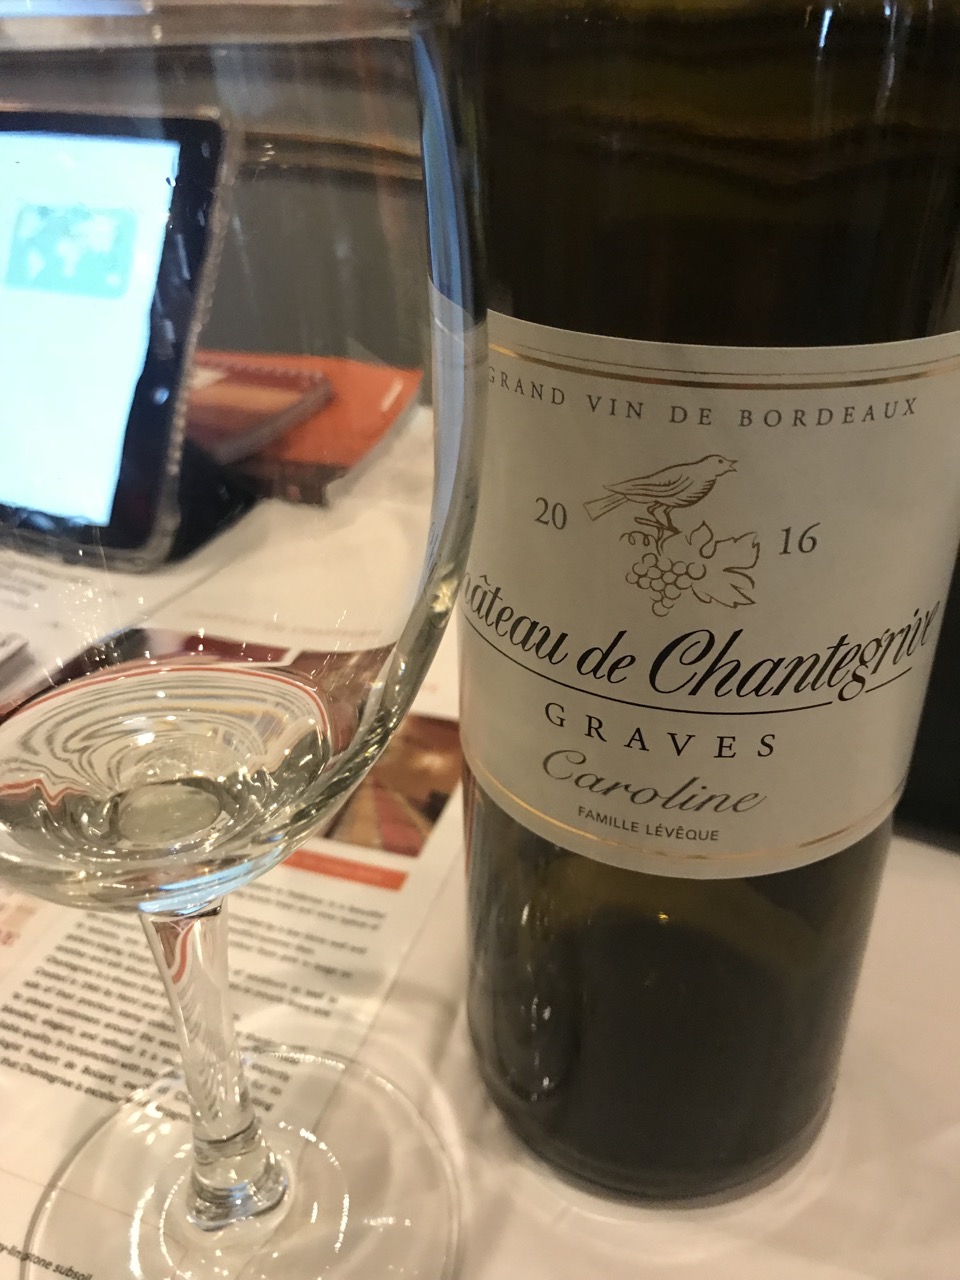 Pessac-Léognan and Graves from bottle Chronicles 2016 | Wine